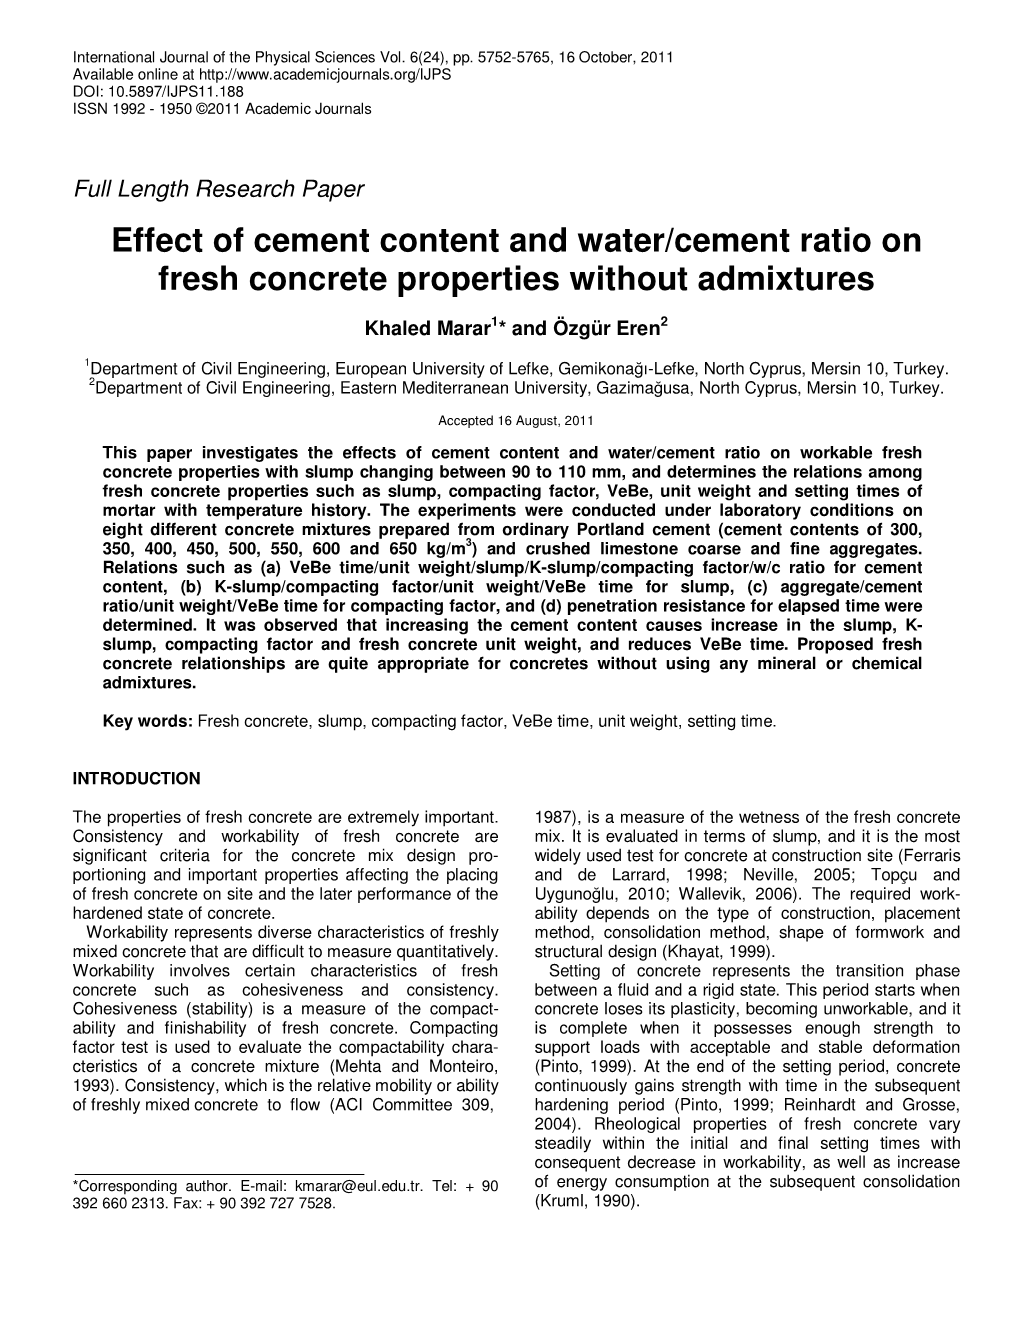 Effect of Cement Content and Water/Cement Ratio on Fresh Concrete Properties Without Admixtures